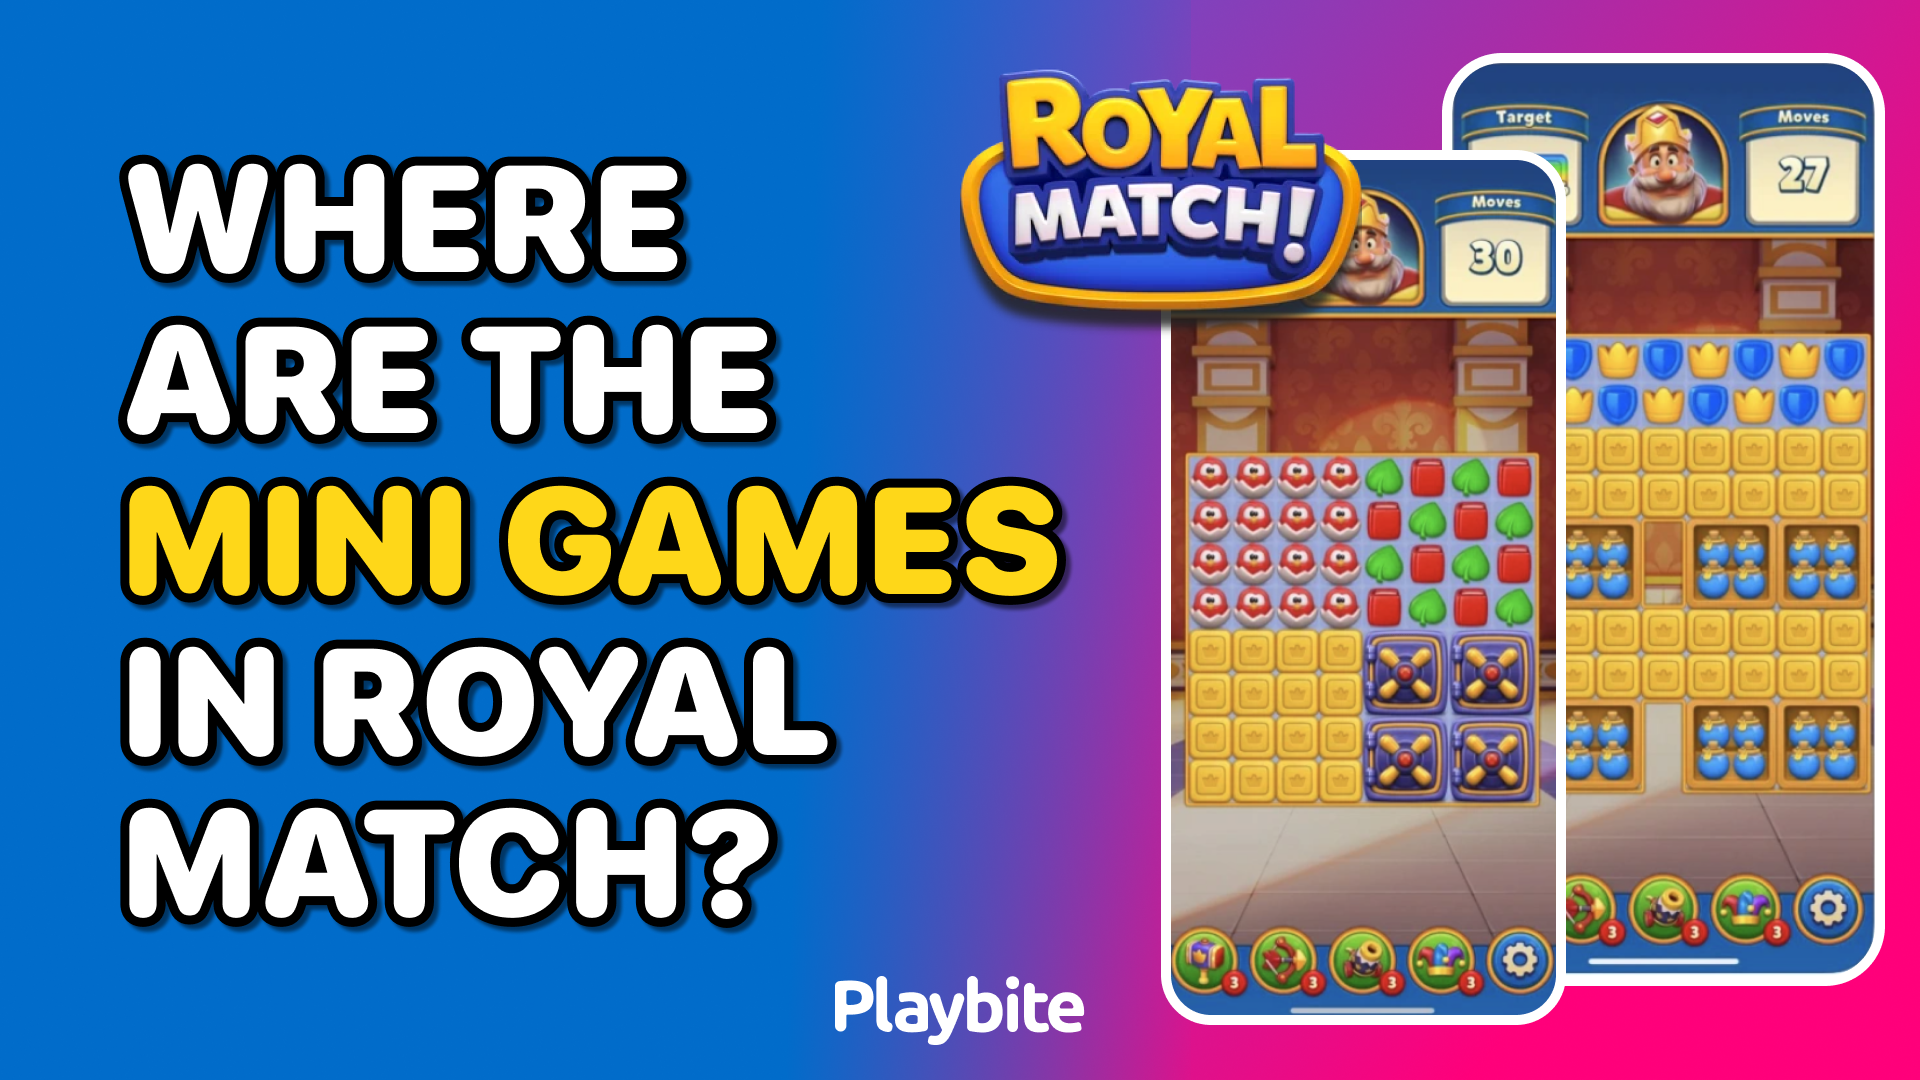 Where Are the Mini Games in Royal Match?